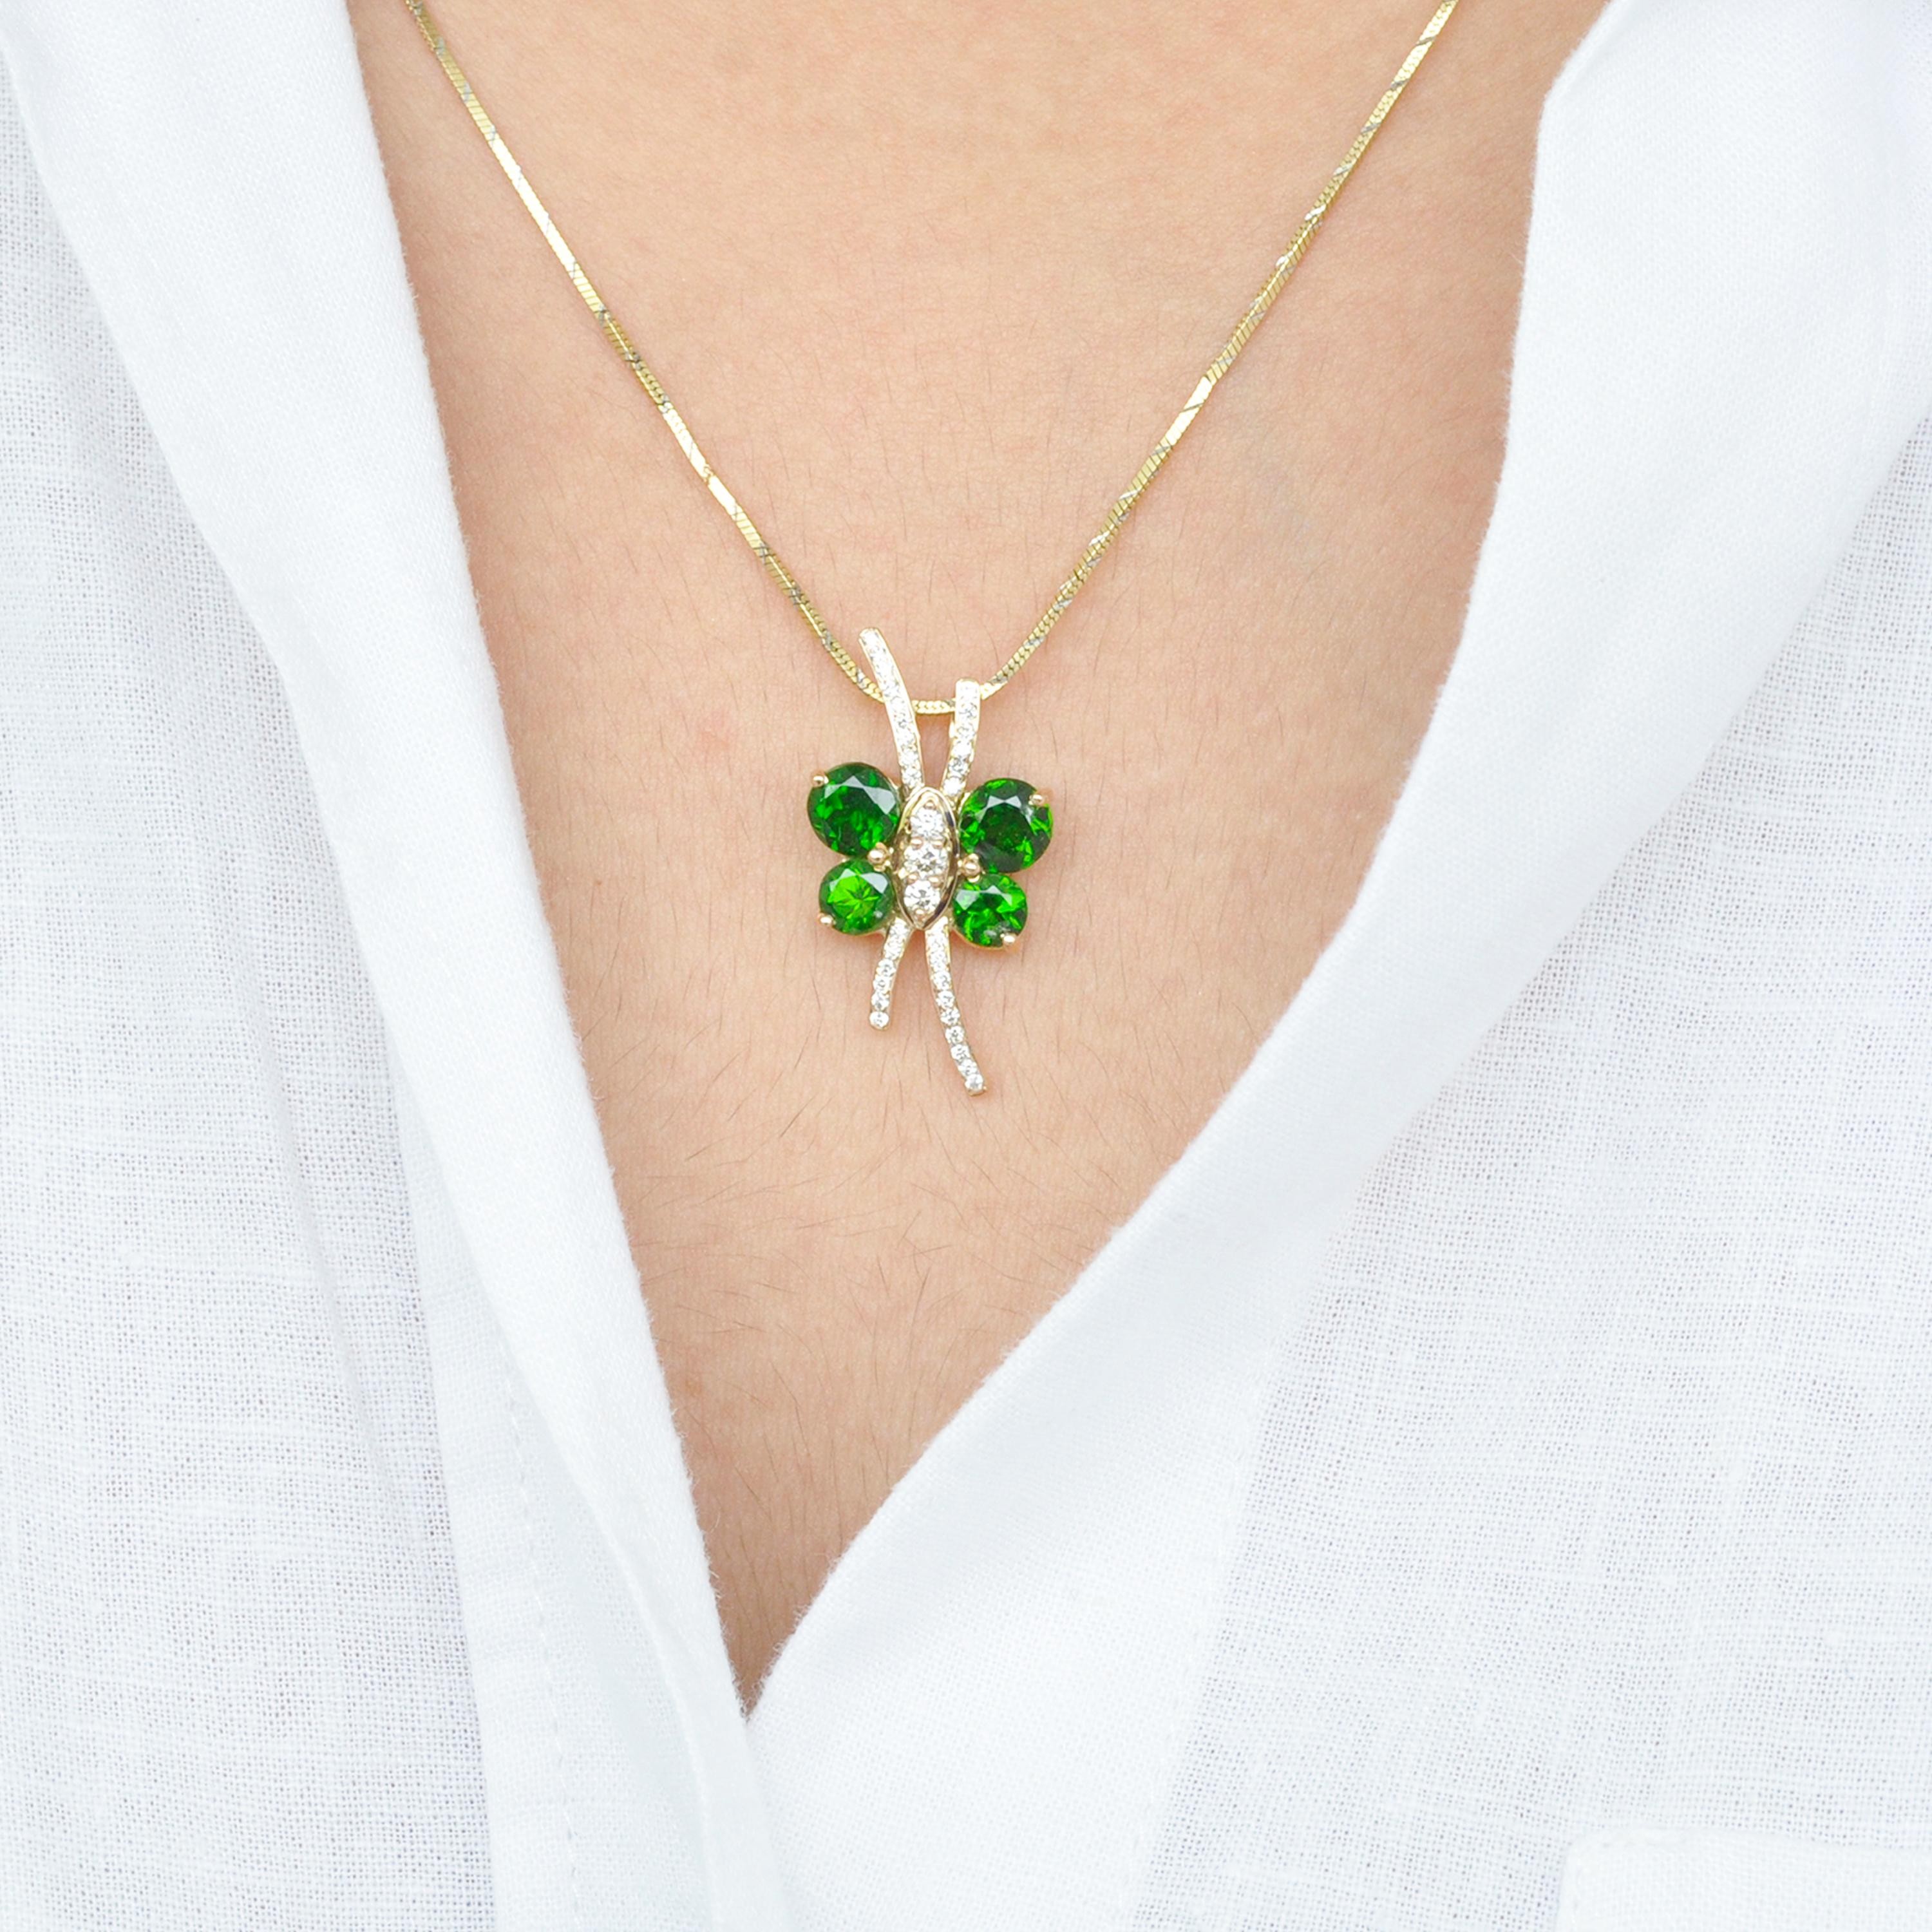 18 karat chrome diopside diamond butterfly pendant necklace.

A chic butterfly pendant necklace is set in 18K Gold using fine quality alloys. Diamonds of quality VVS/VS - G/H are used in the centre to form the body and antenna of the butterfly. The